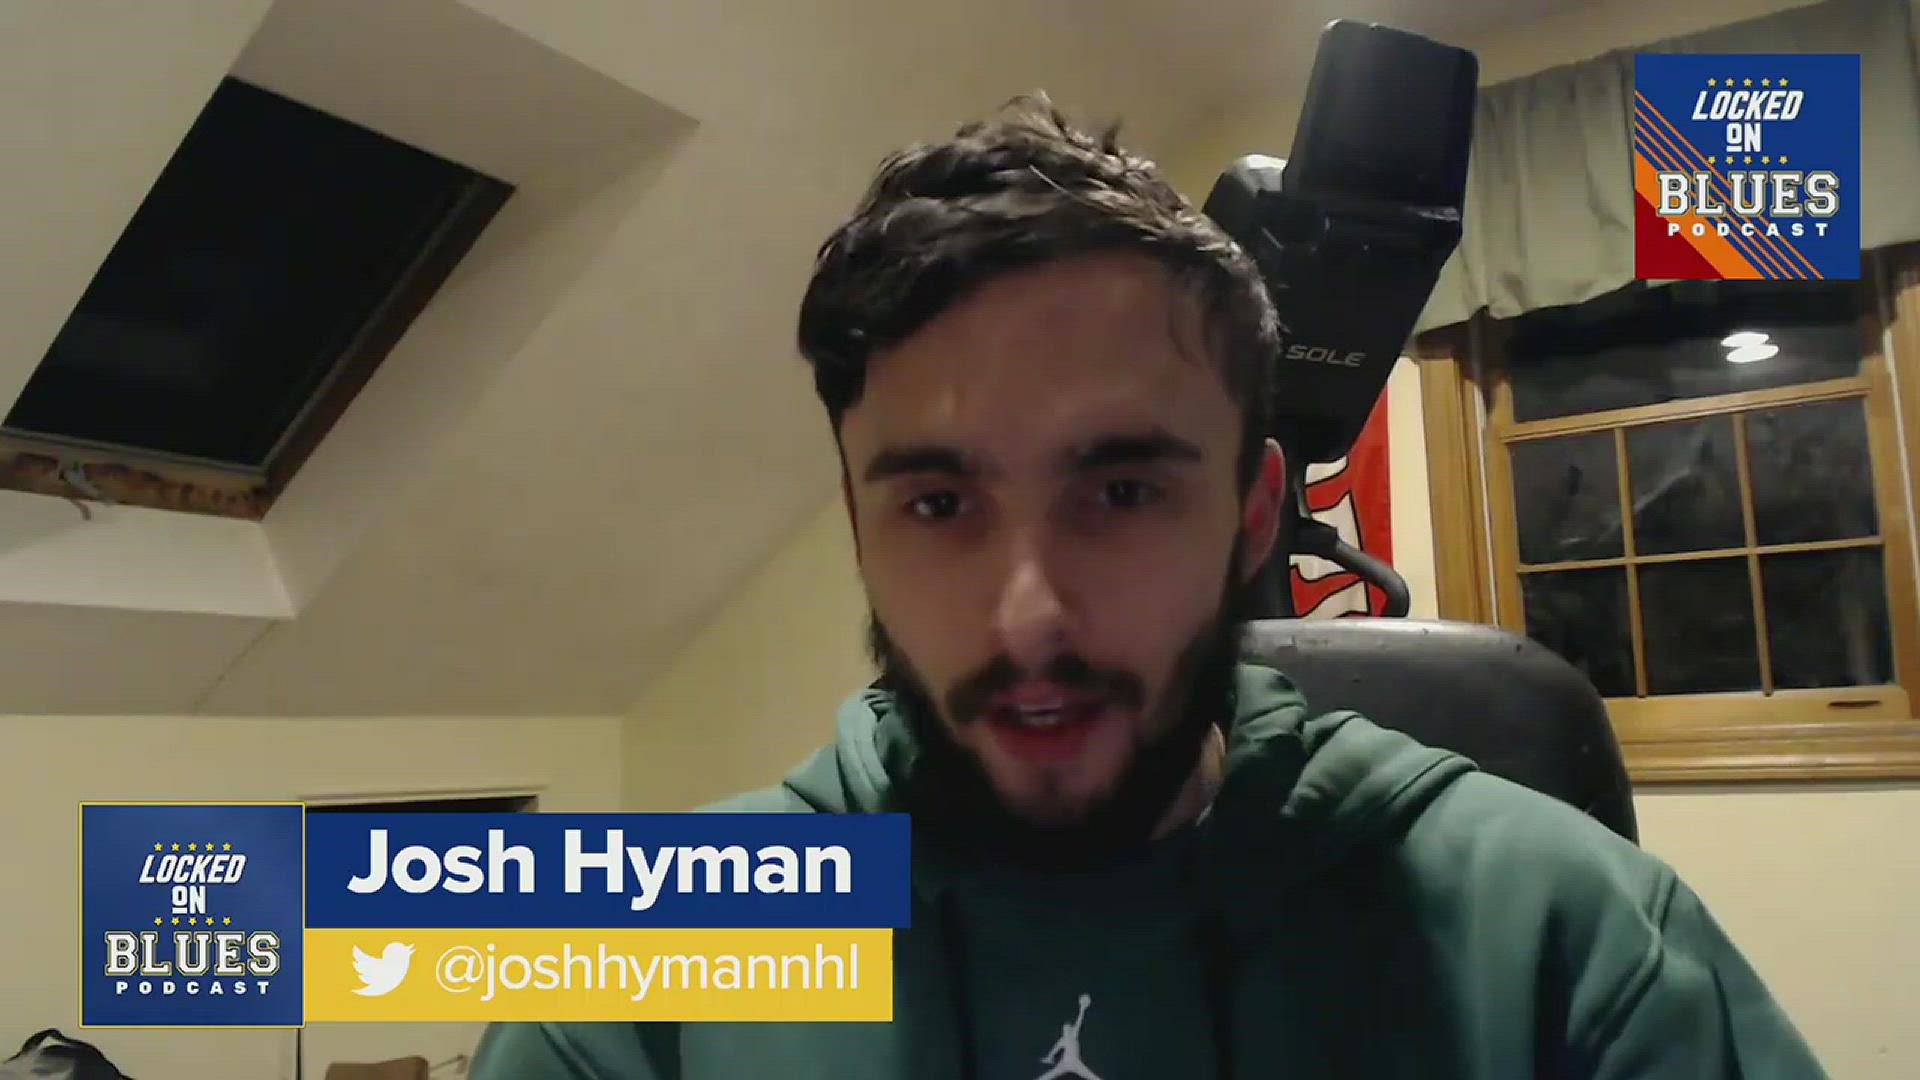 Josh Hyman reacts to the St. Louis Blues shootout victory over the Toronto Maple Leafs. Later, he previews tonight's game against the New Jersey Devils.